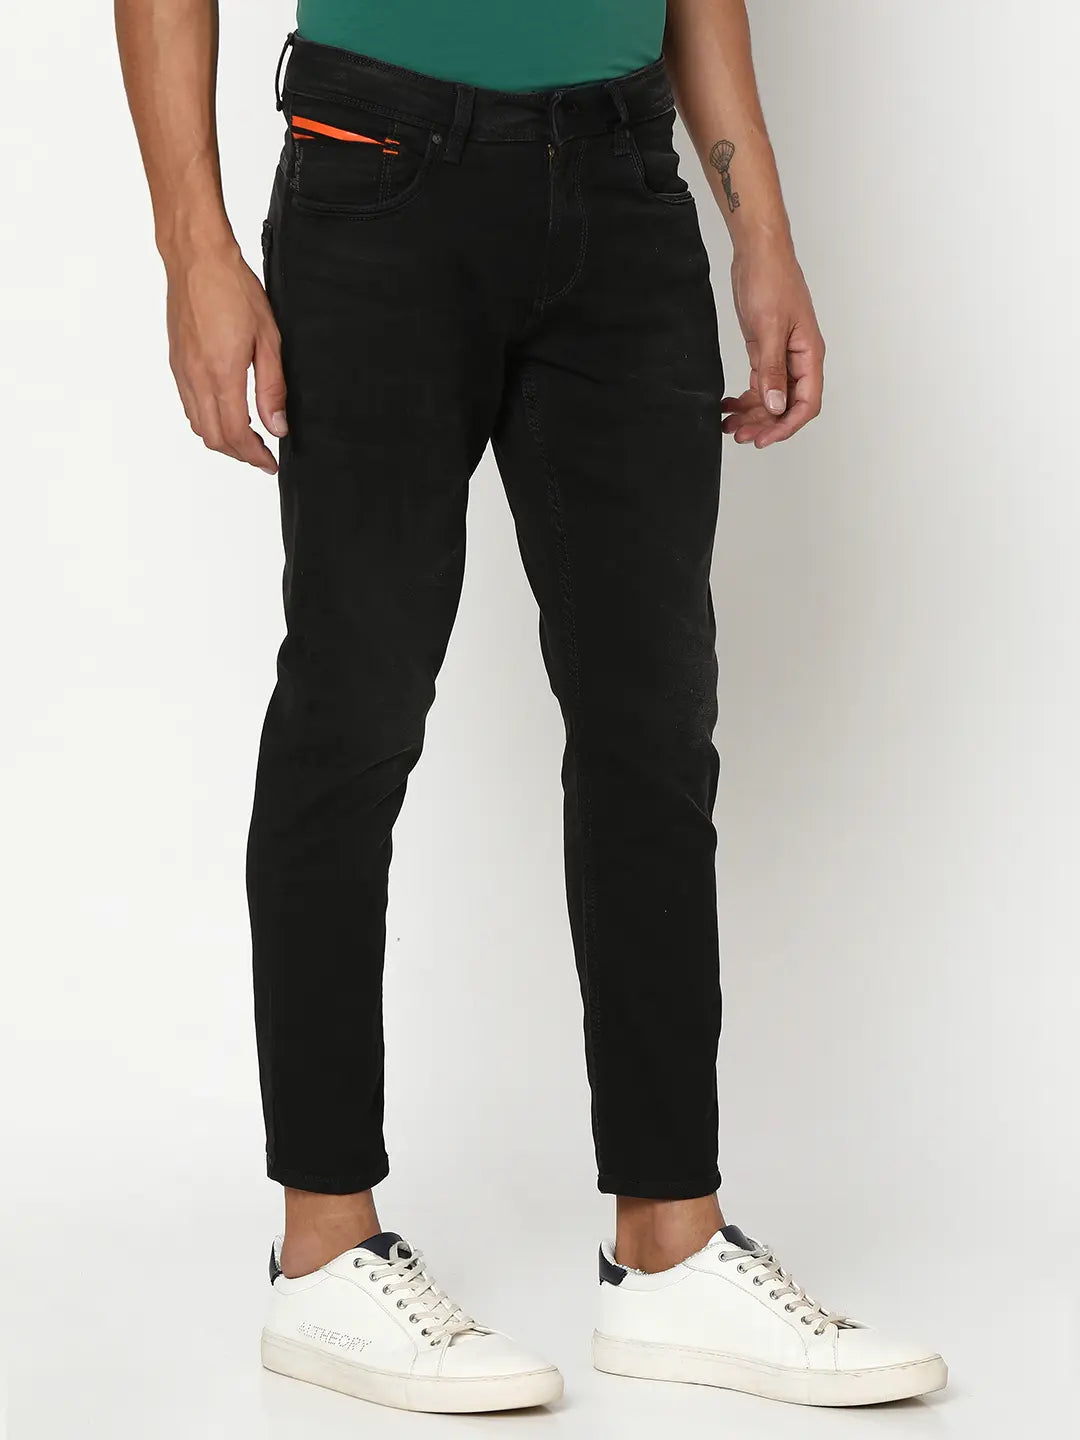 Spykar Men Black Cotton Slim Fit Tapered Length Clean Look Mid Rise Stretchable Jeans (Kano)